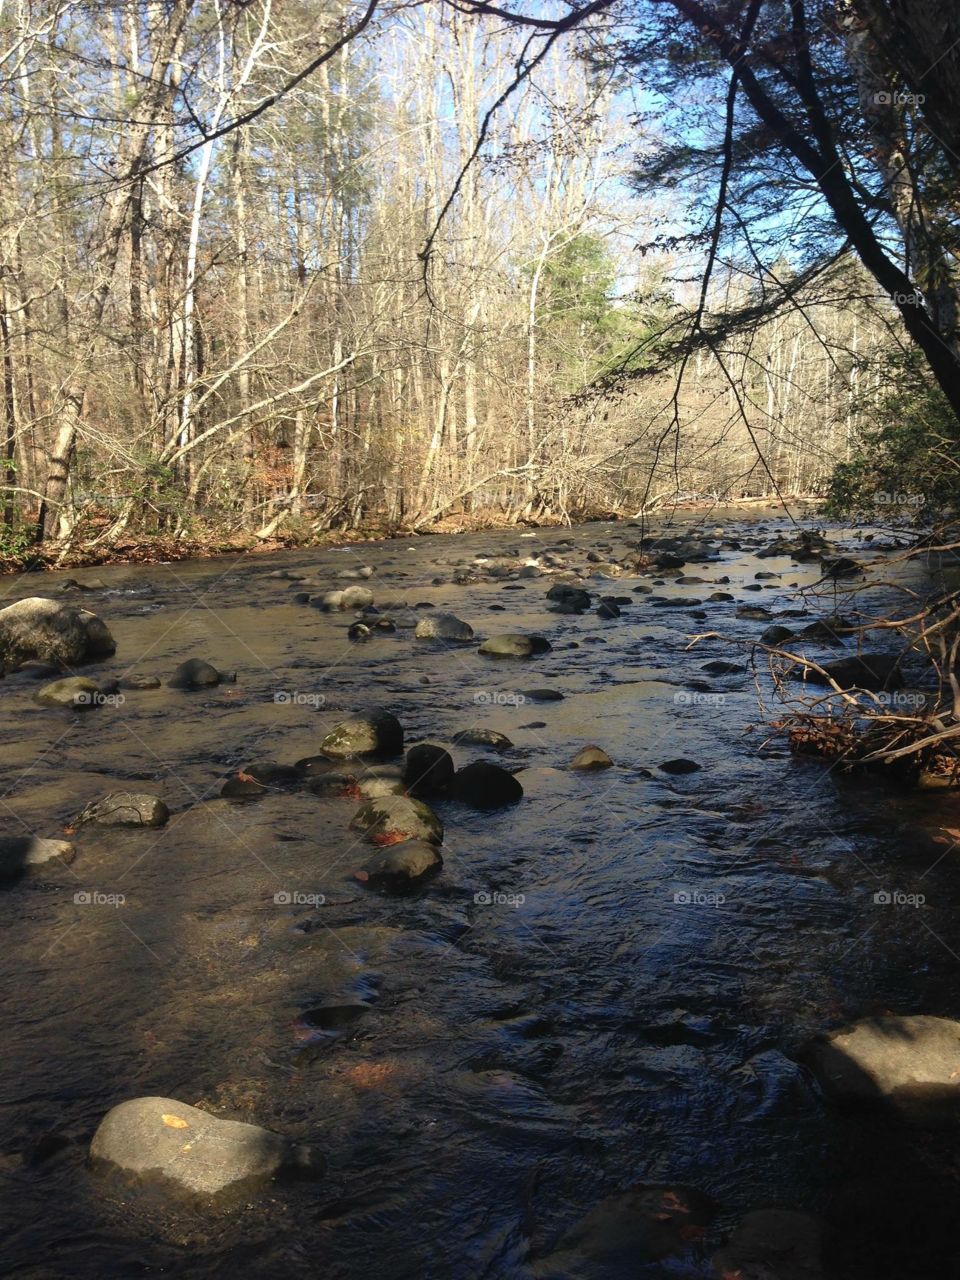 Allow your senses to feel the cool creek as it cleanses the fiery soul and soothes the weary mind. 